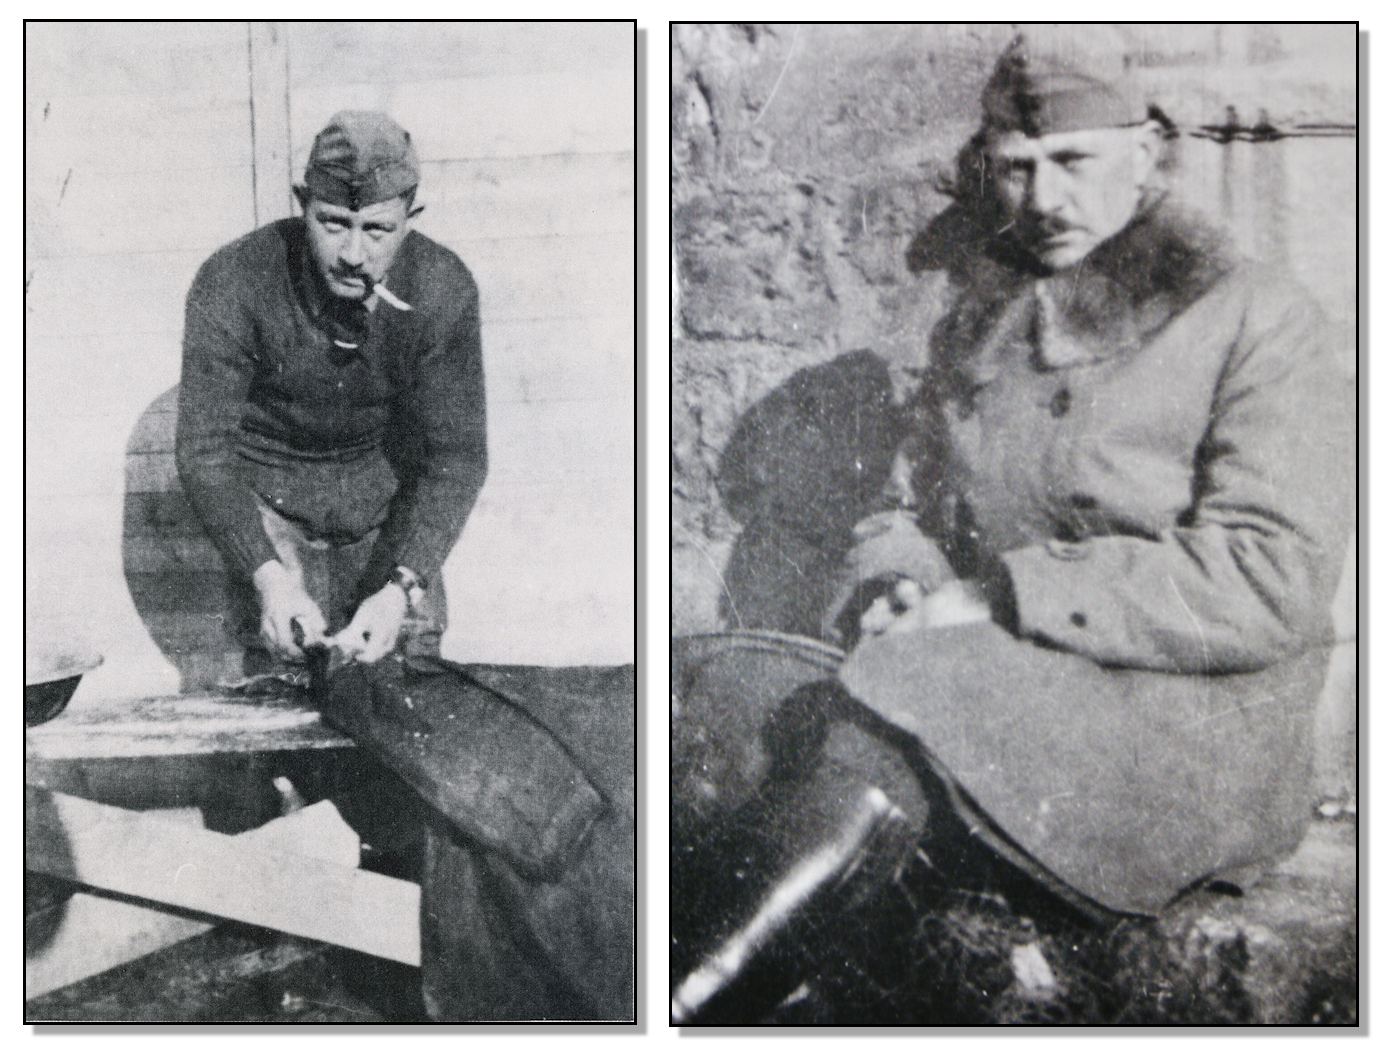 Caption: Two photos of Bill Frayne, location not known, photographer not known. Image courtesy Over the Front, League of World War One Aviation Historians, Arnold, Md., used with permission.